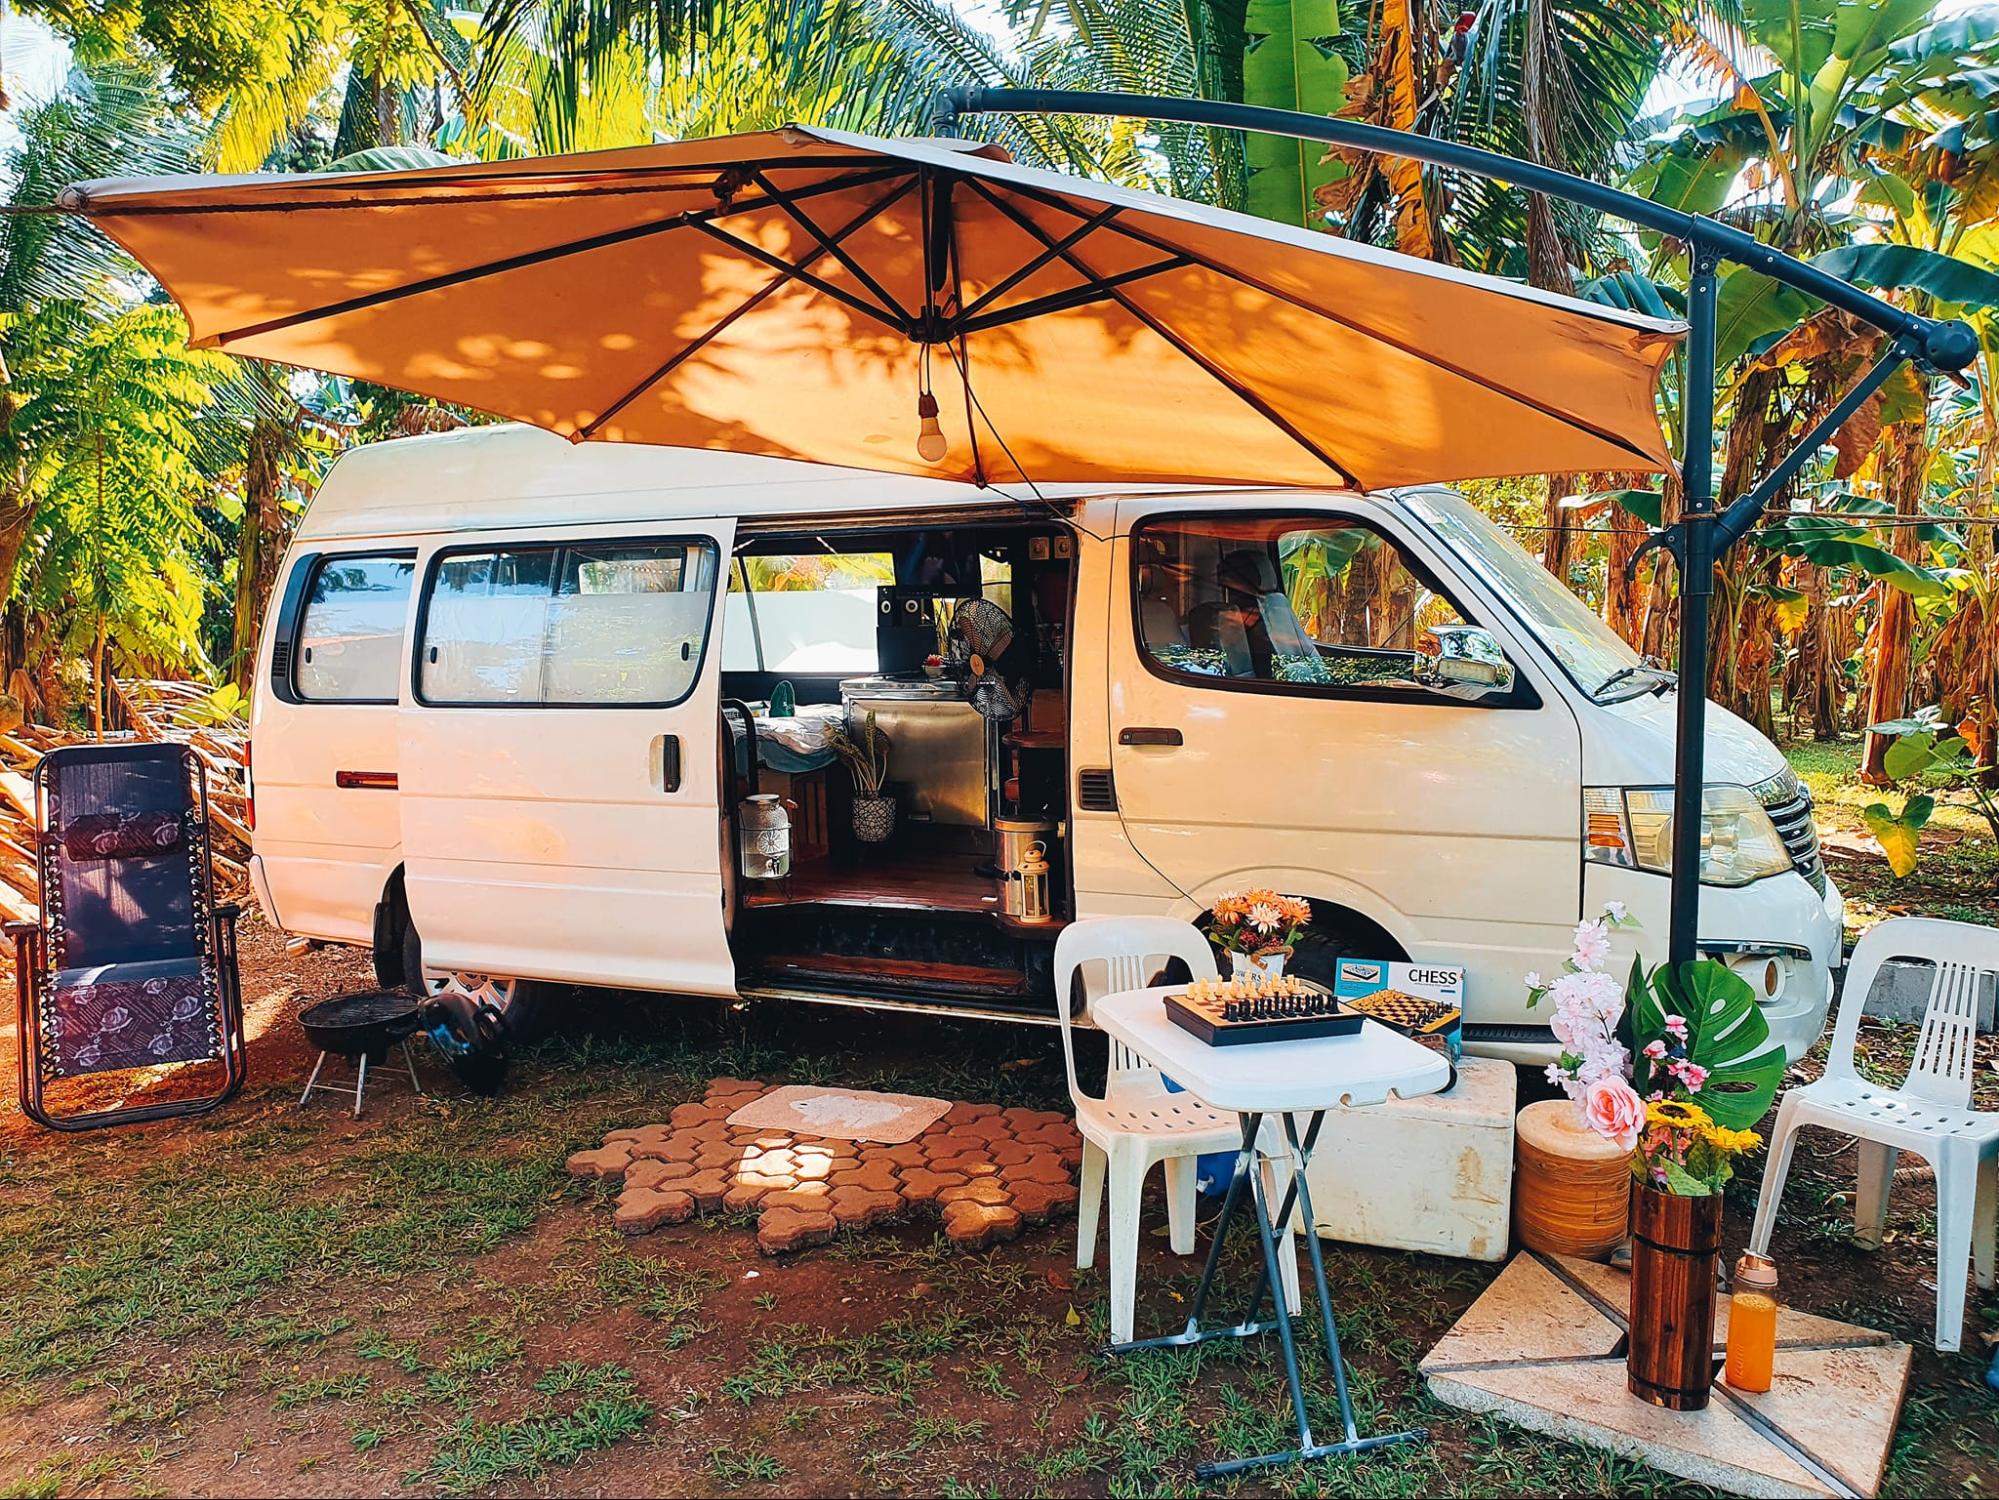 Paping's Staycation and Campsite - camper van